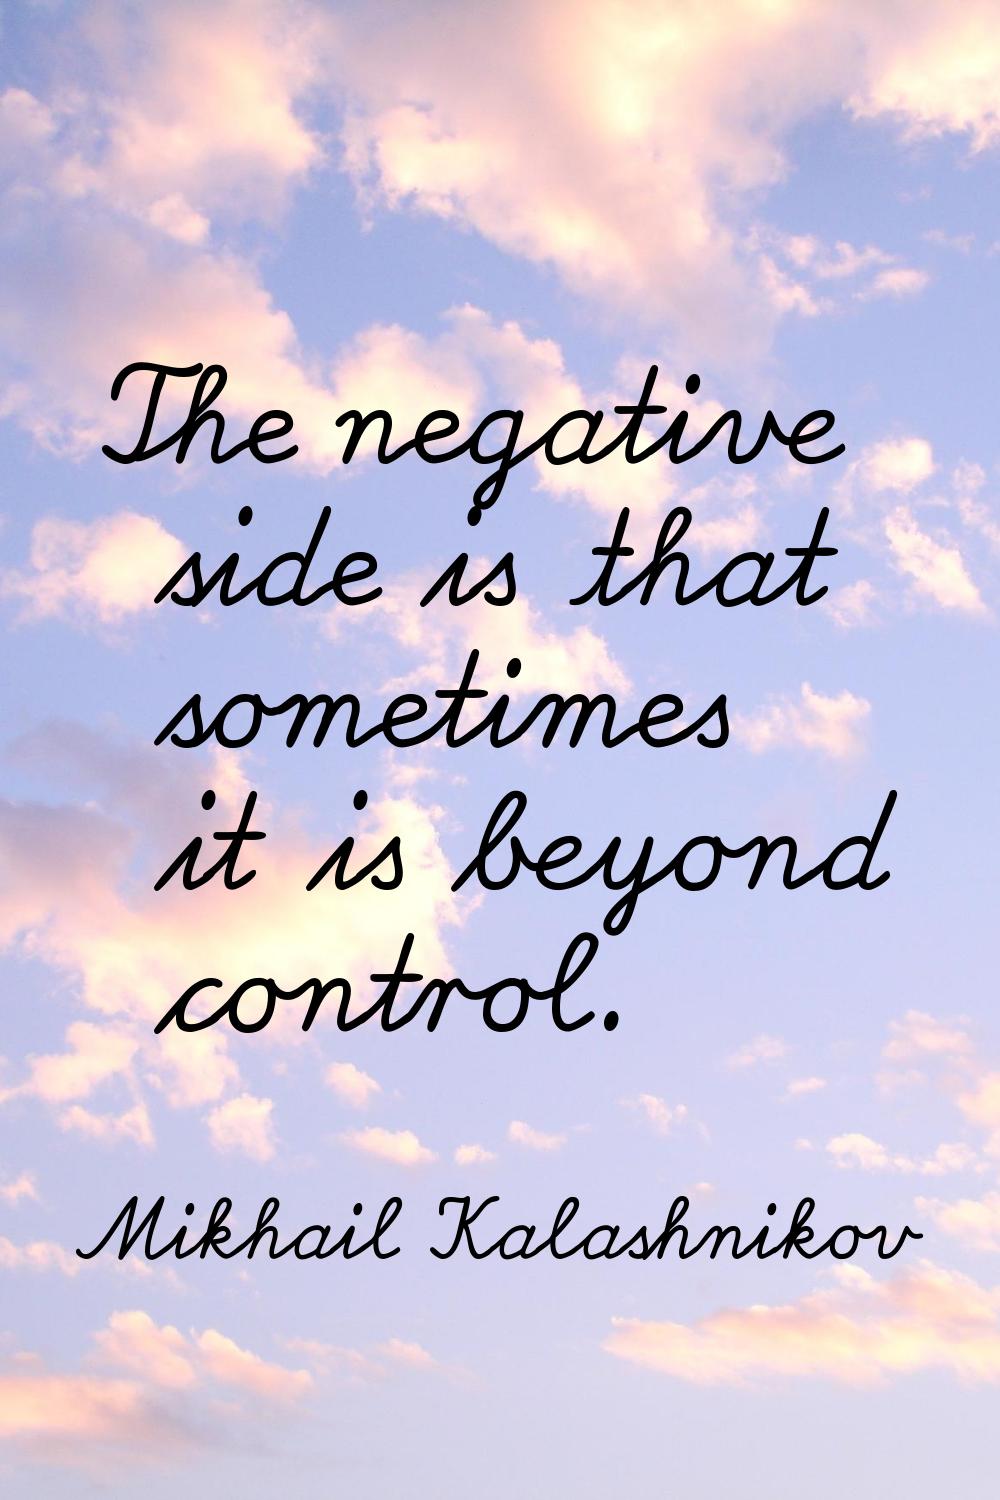 The negative side is that sometimes it is beyond control.